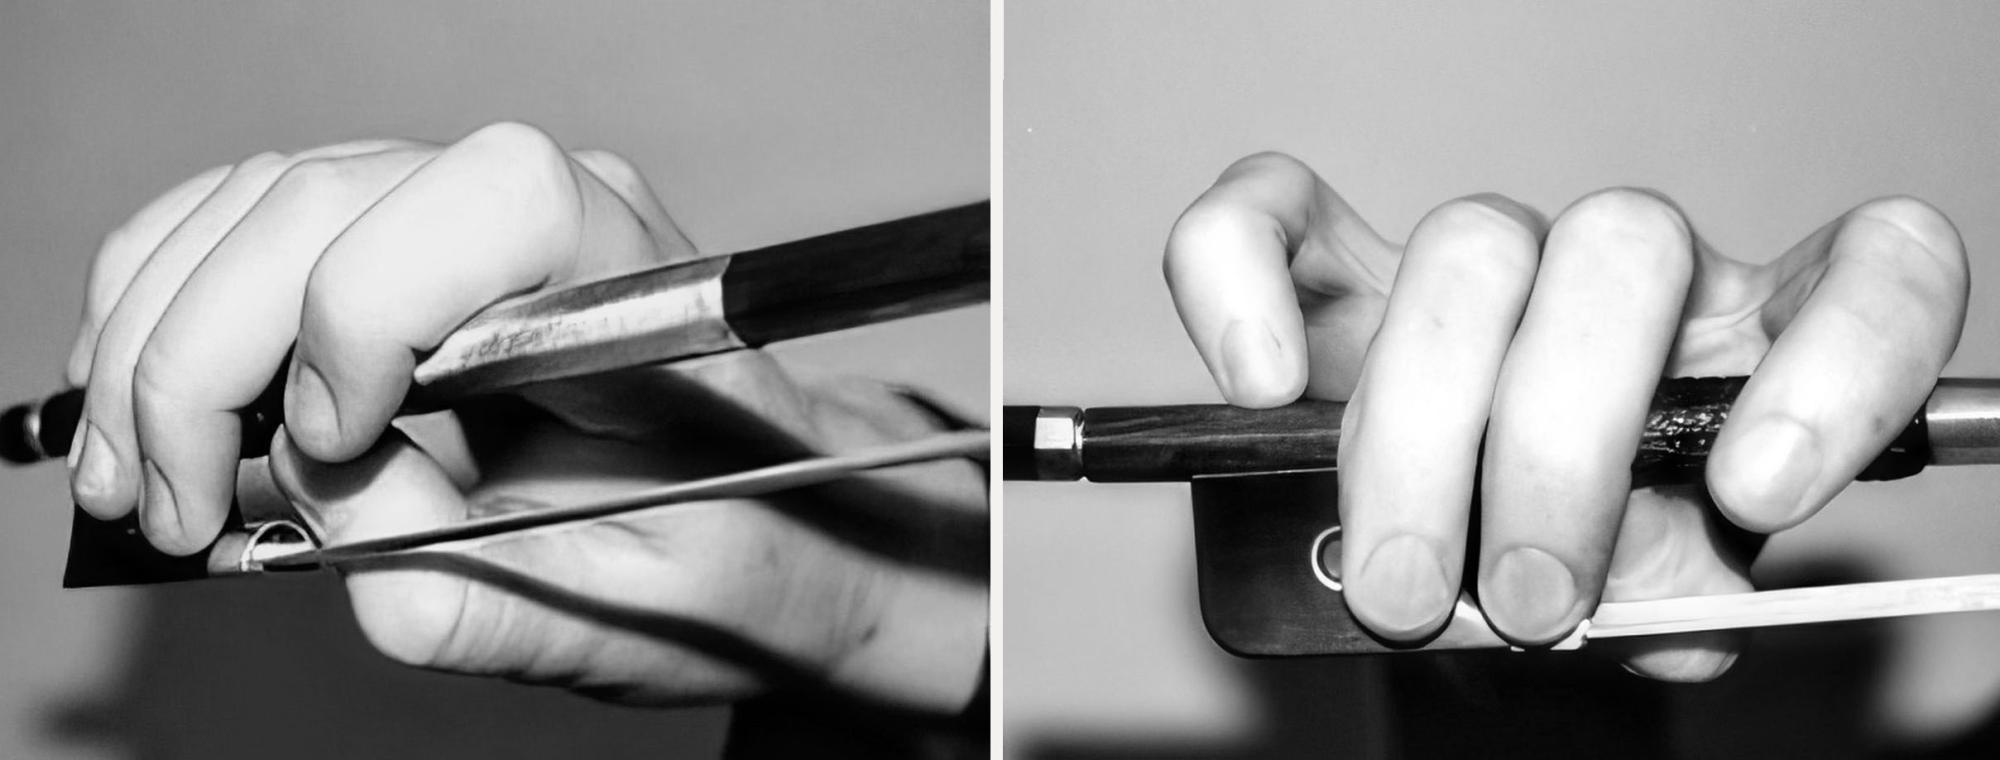 side by side images that show proper hand placement on a violin bow.